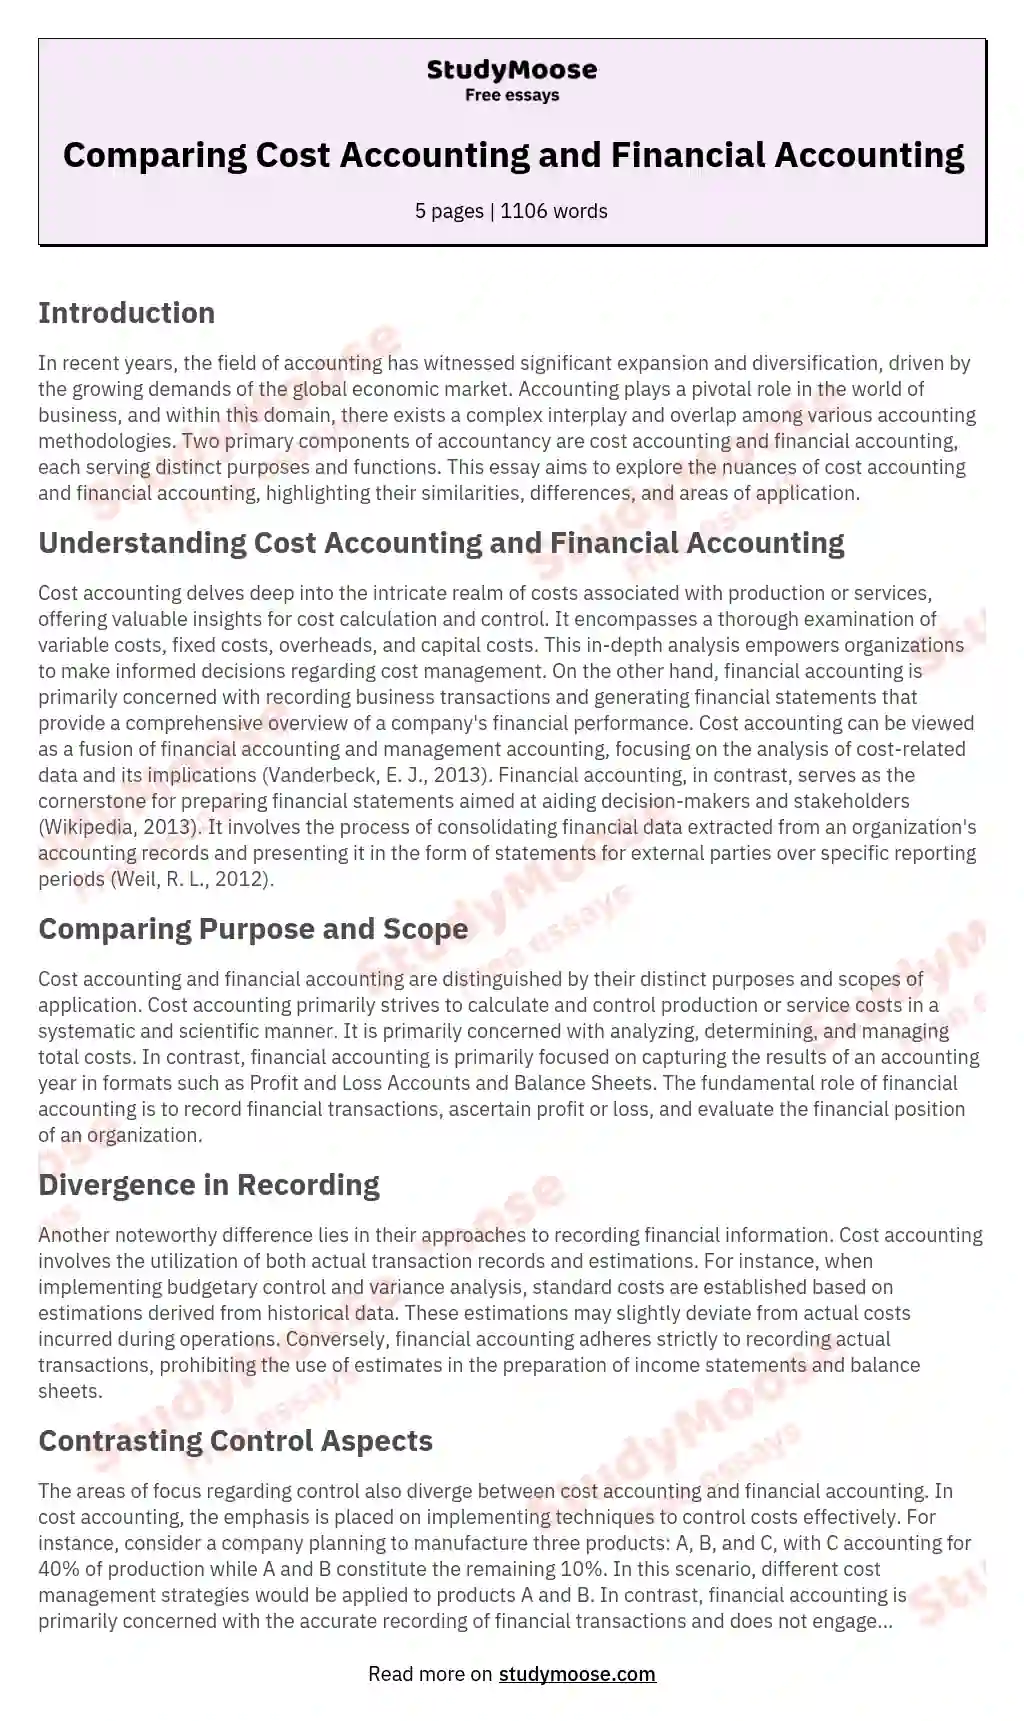 Comparing Cost Accounting and Financial Accounting essay